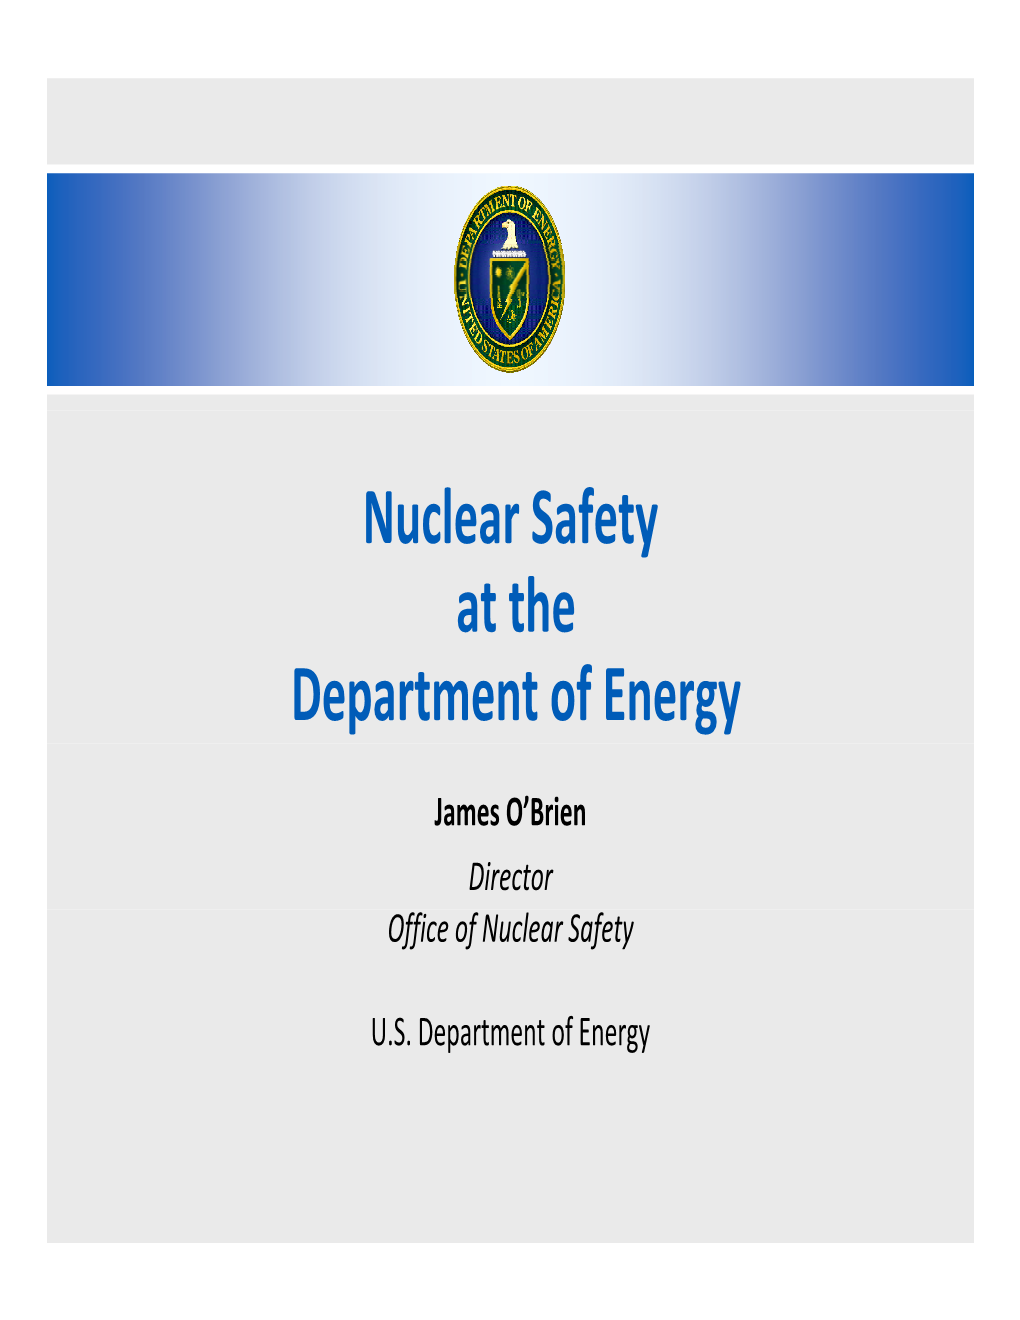 Nuclear Safety at the Department of Energy